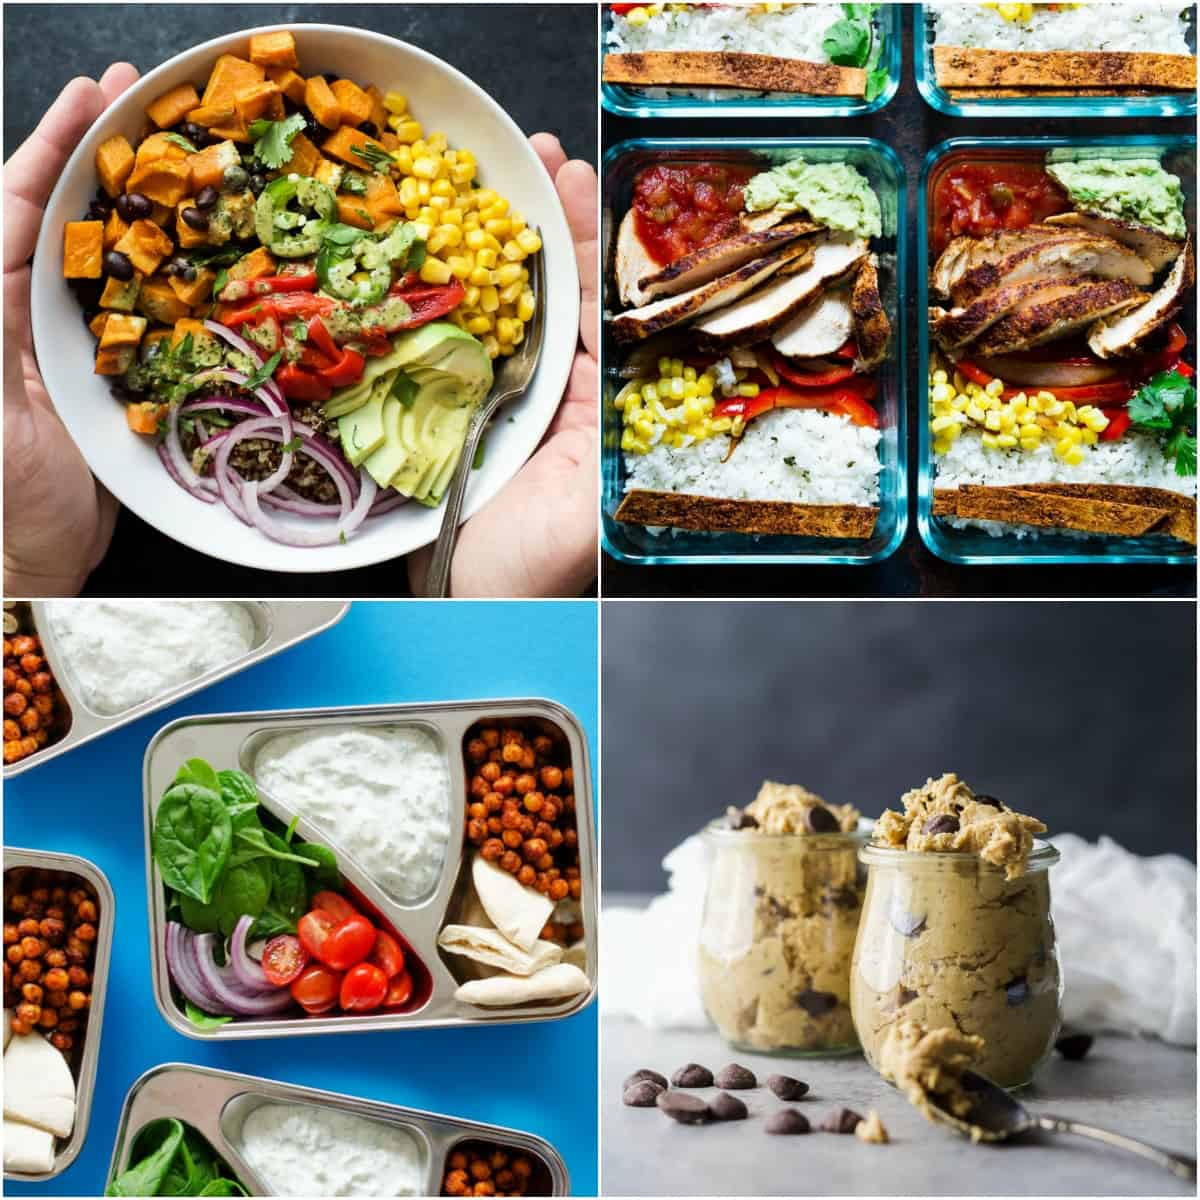 Meal Prep Recipes Breakfast
 23 of the BEST Meal Prep Recipes for Breakfast Lunch